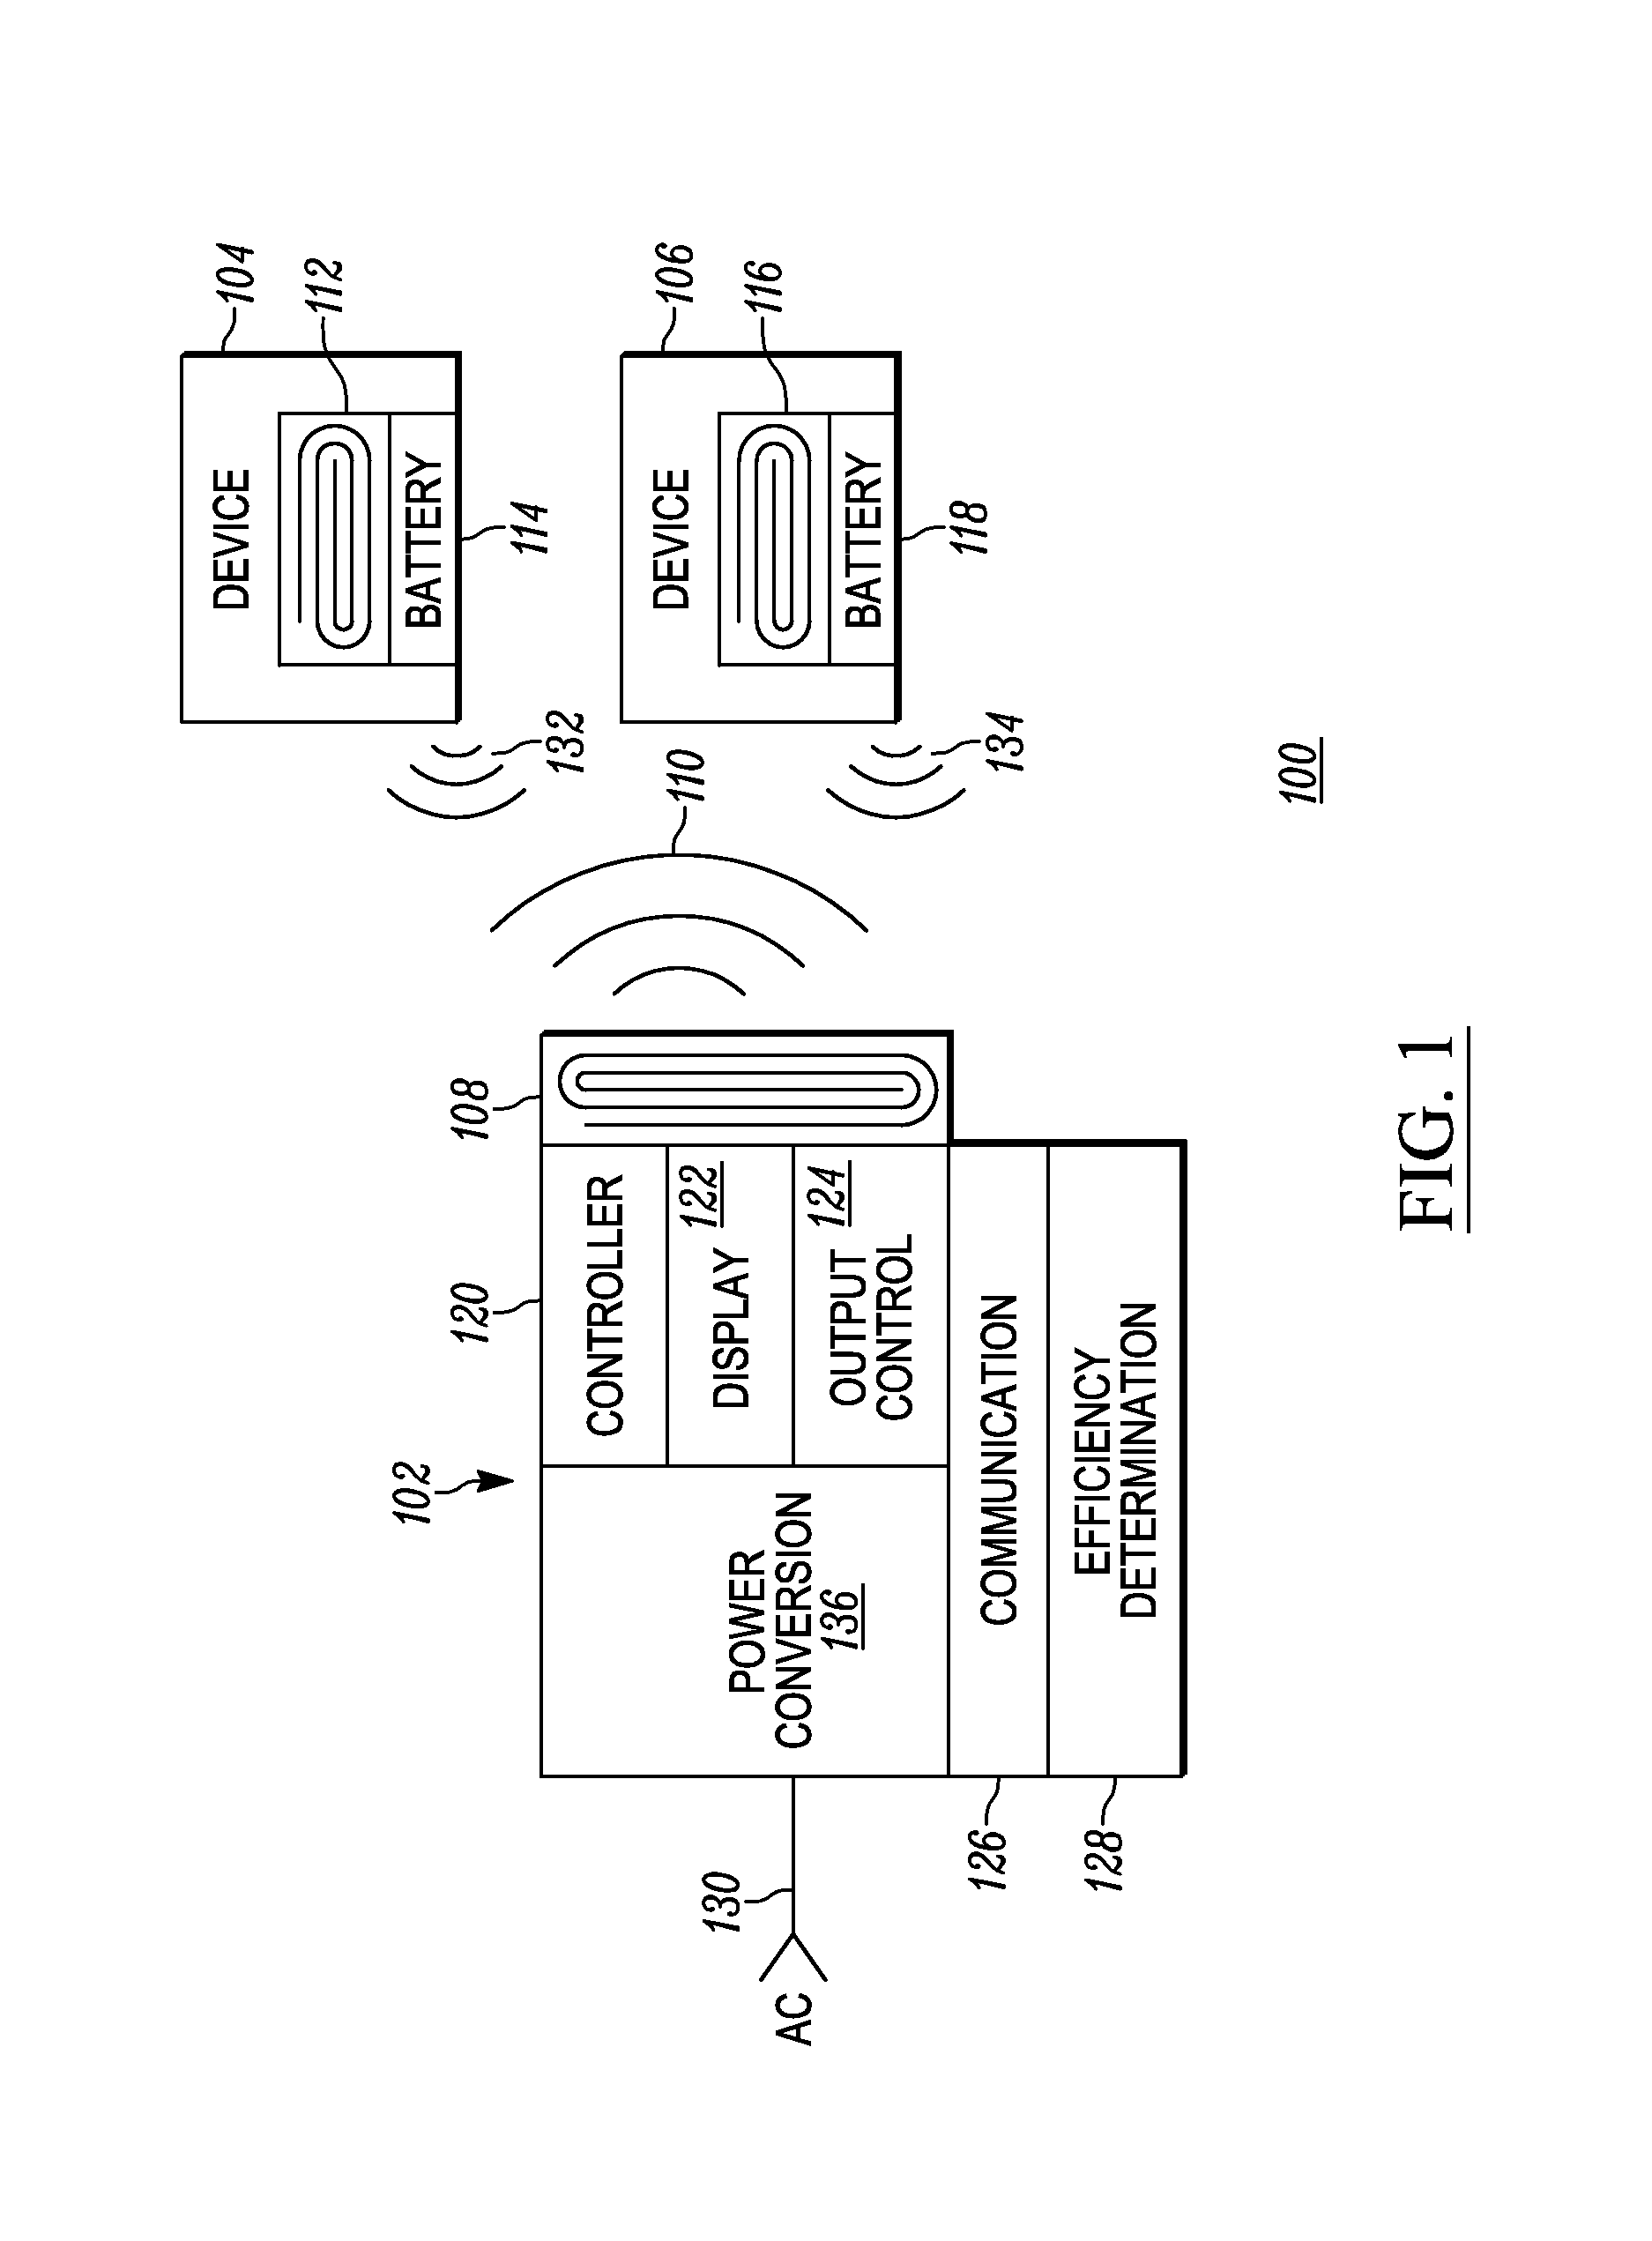 Method and apparatus for efficiency compliance in wireless charging systems